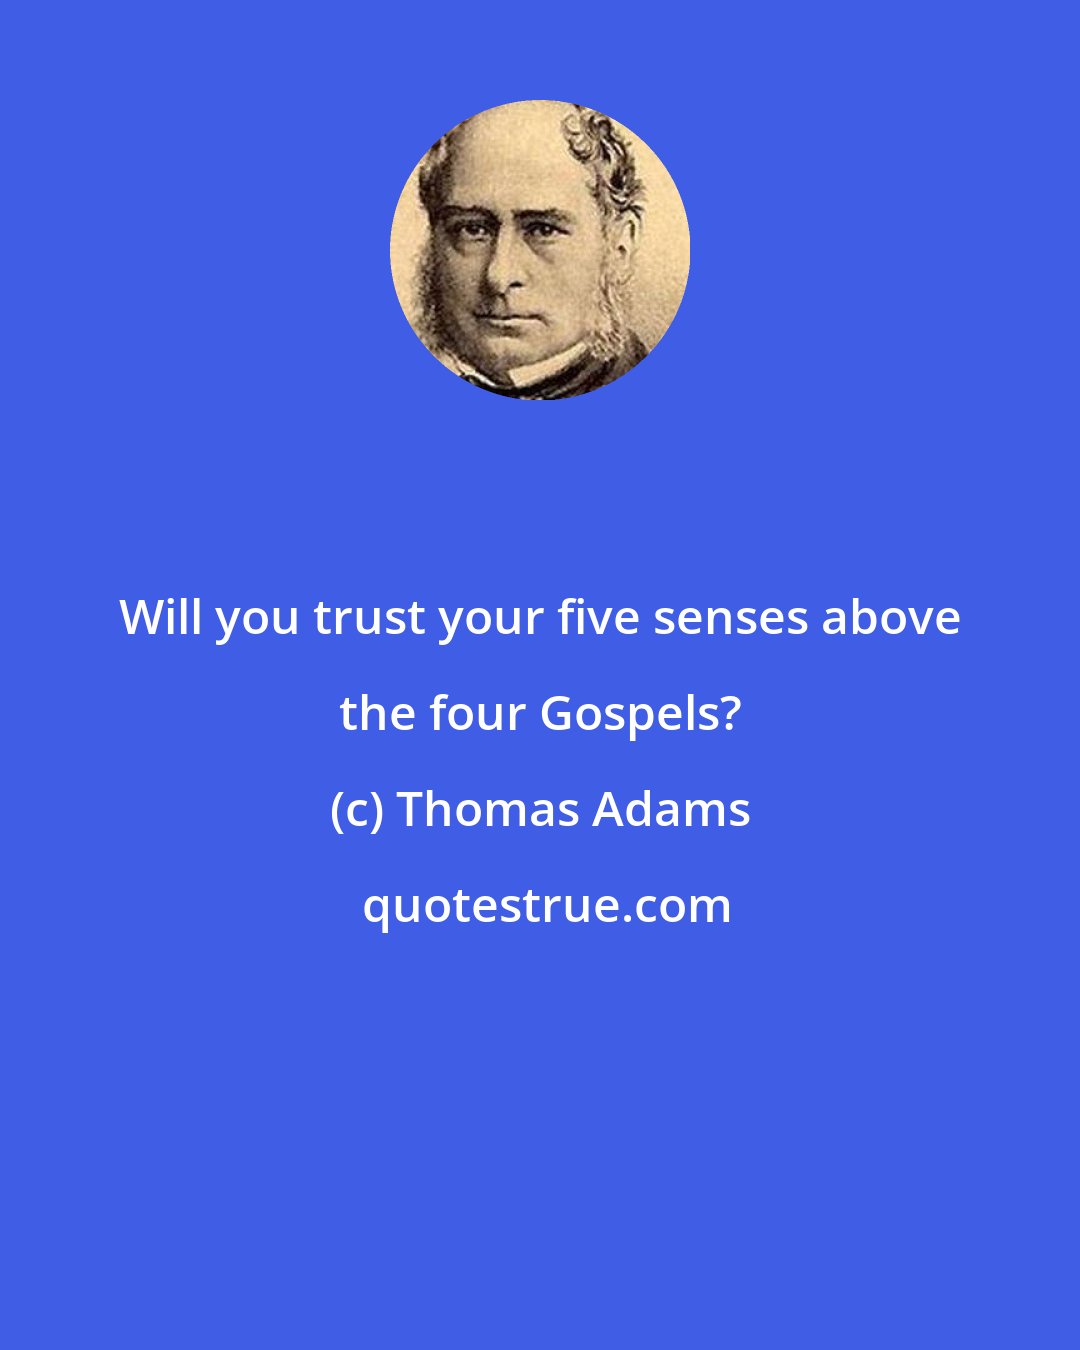 Thomas Adams: Will you trust your five senses above the four Gospels?